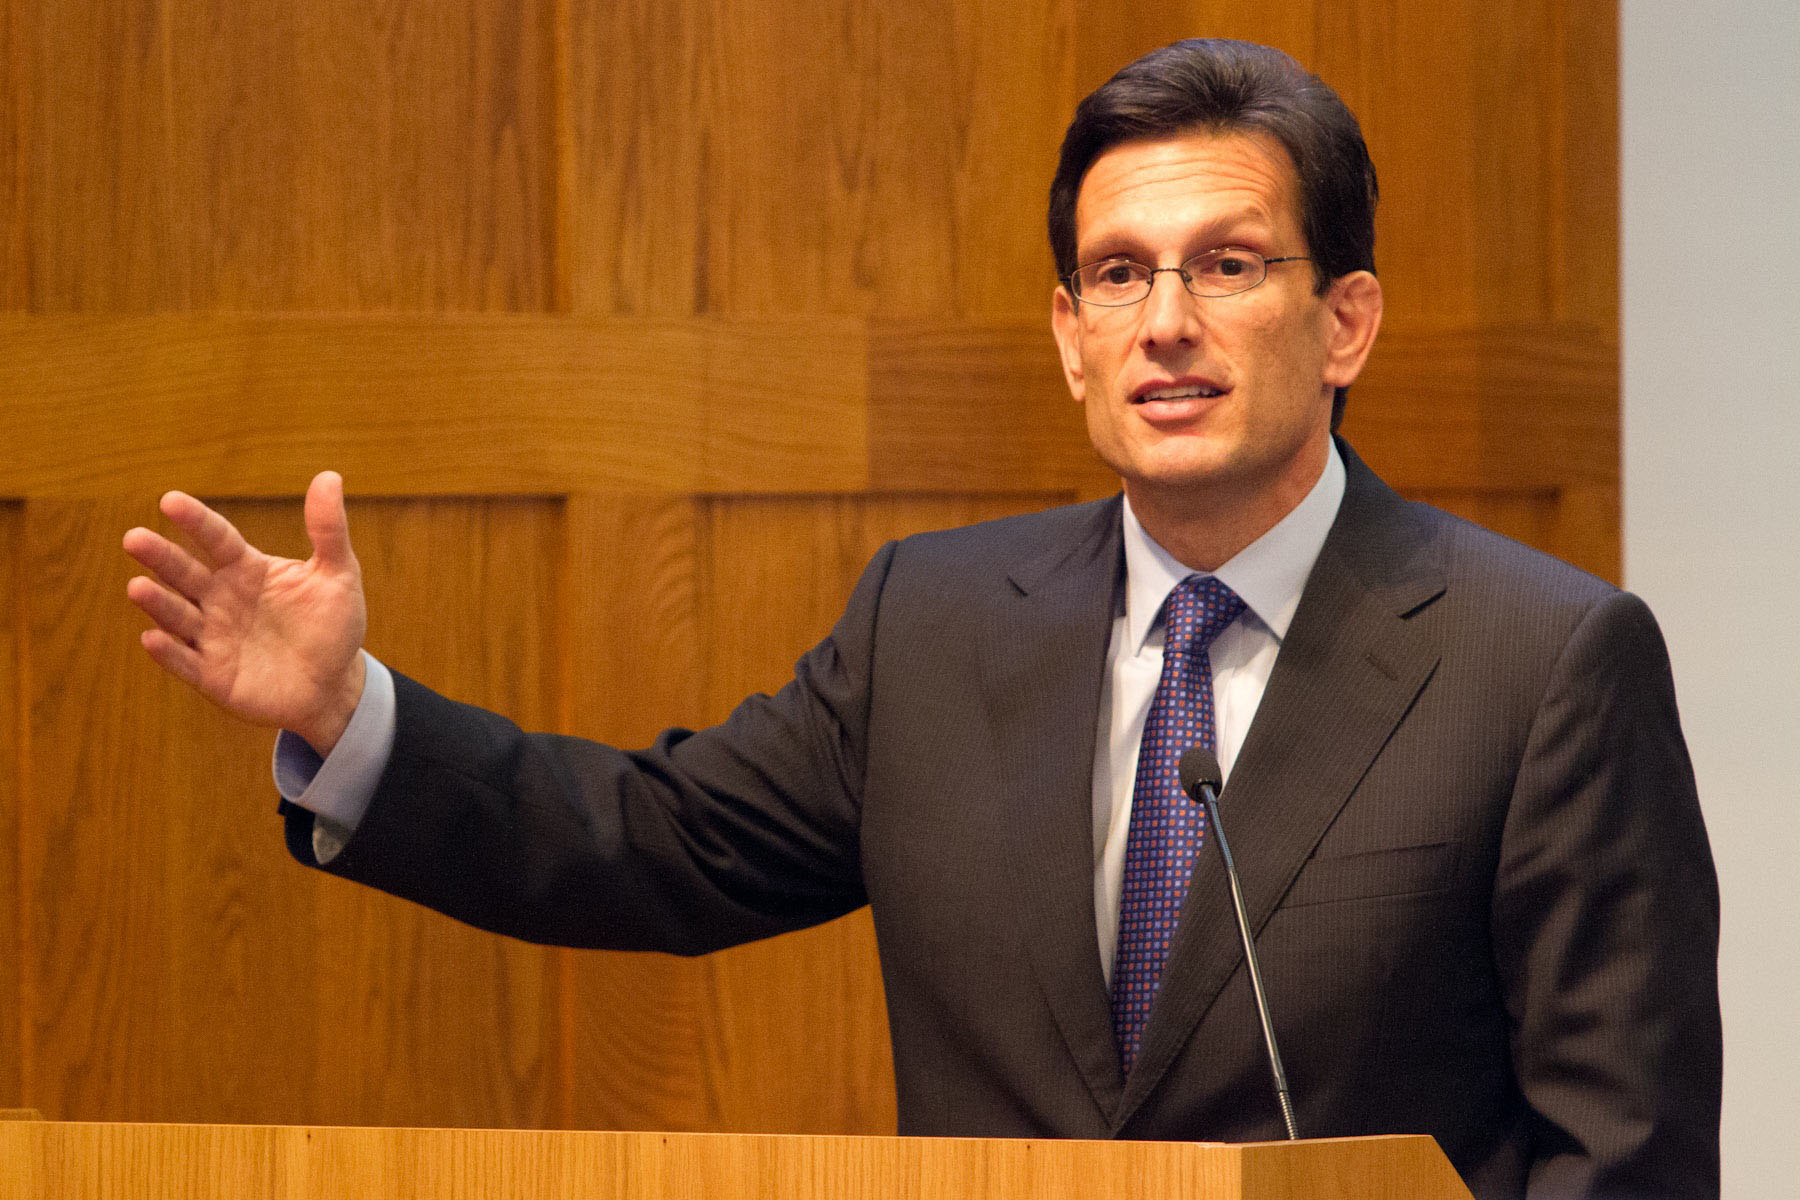 Eric Cantor speaking at a podium